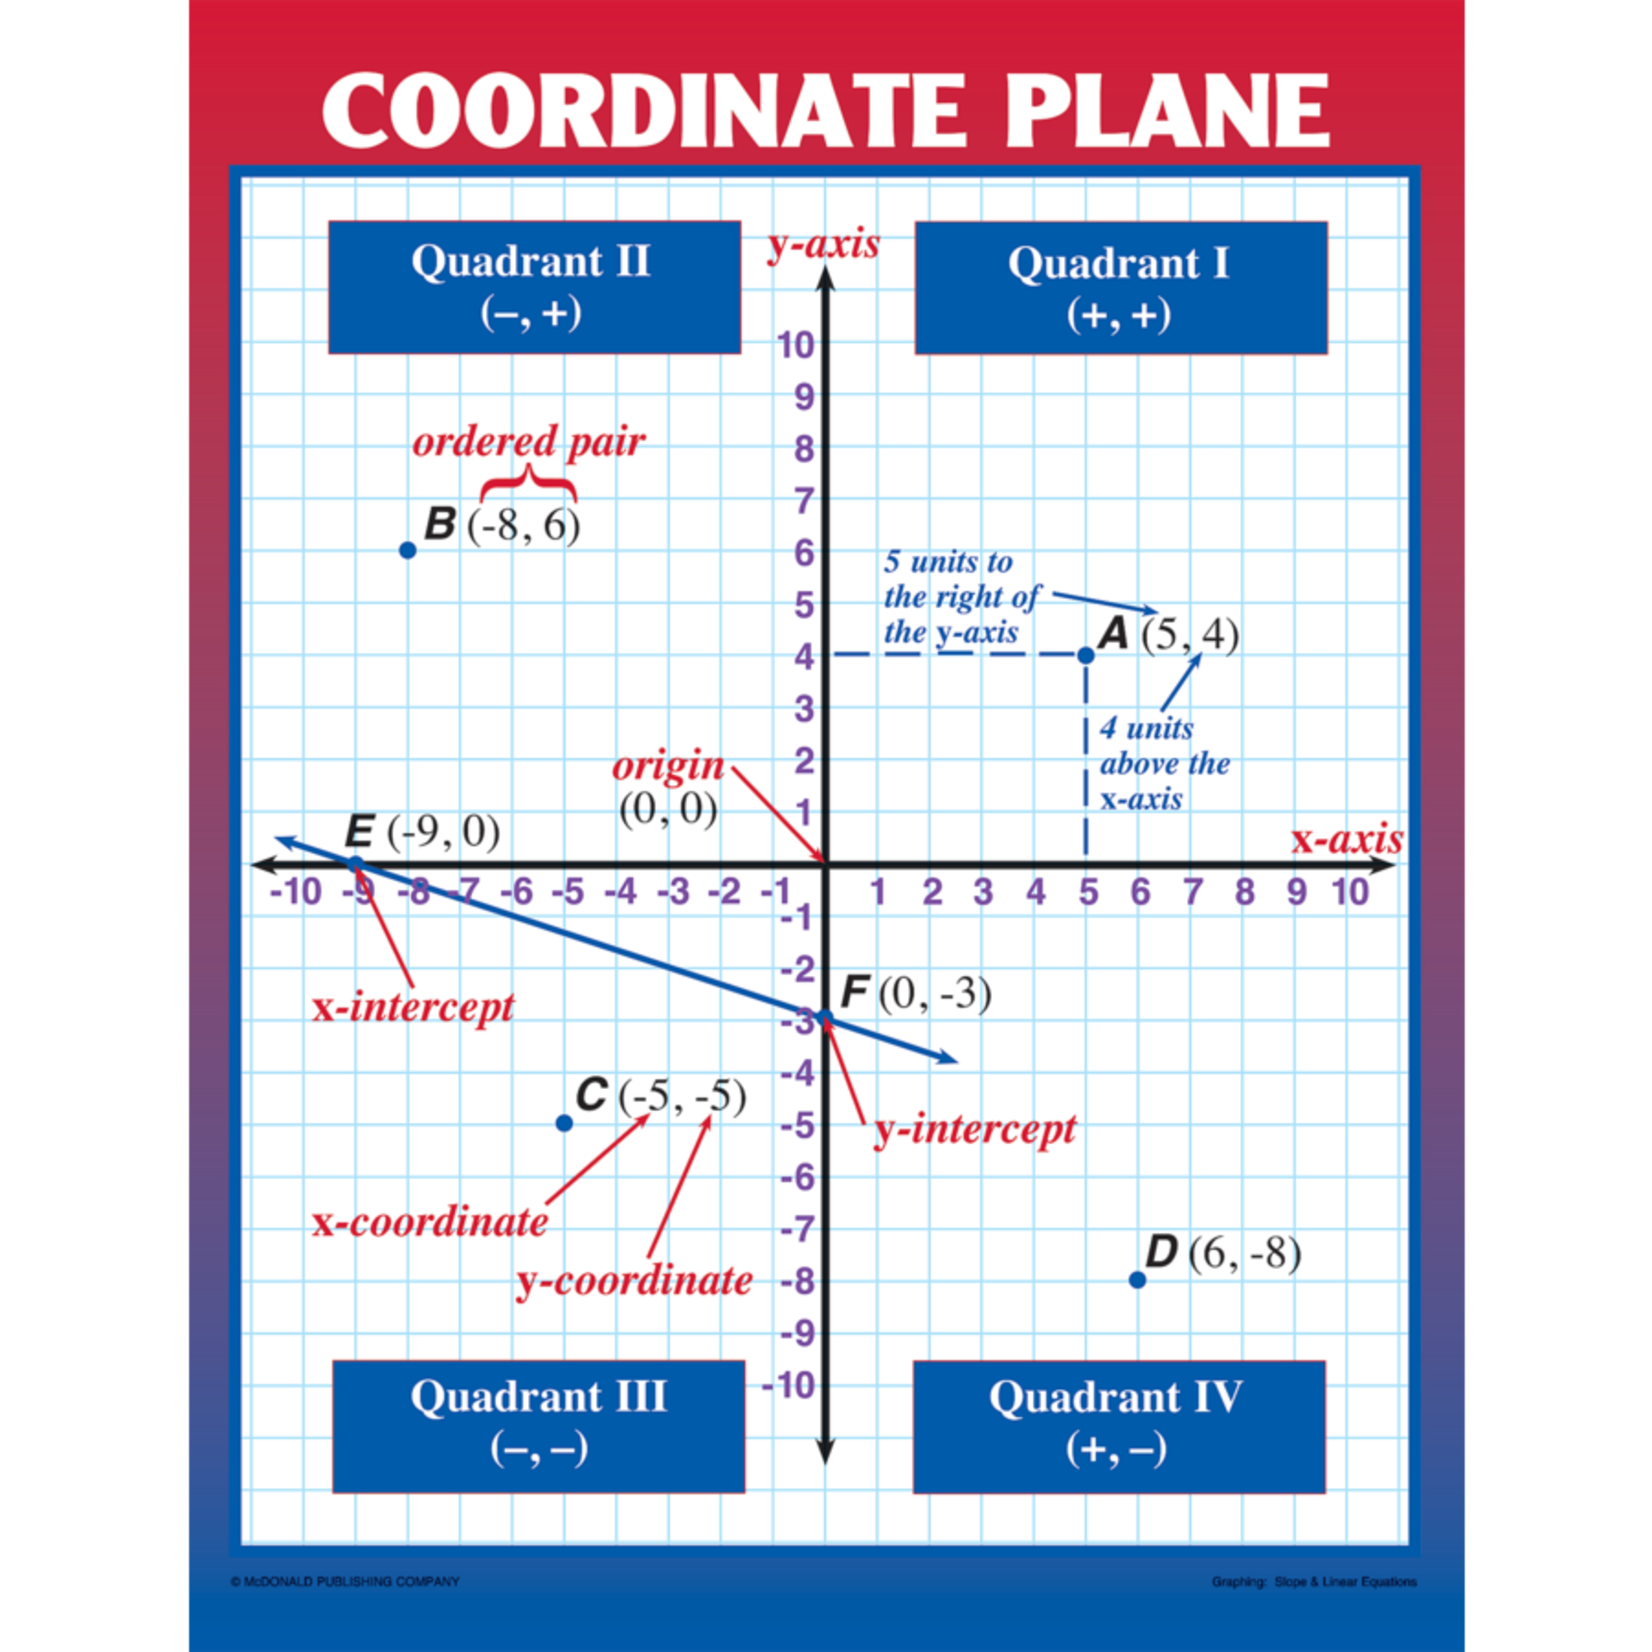 TEACHER CREATED RESOURCES Graphing: Slope & Linear Equations Poster Set